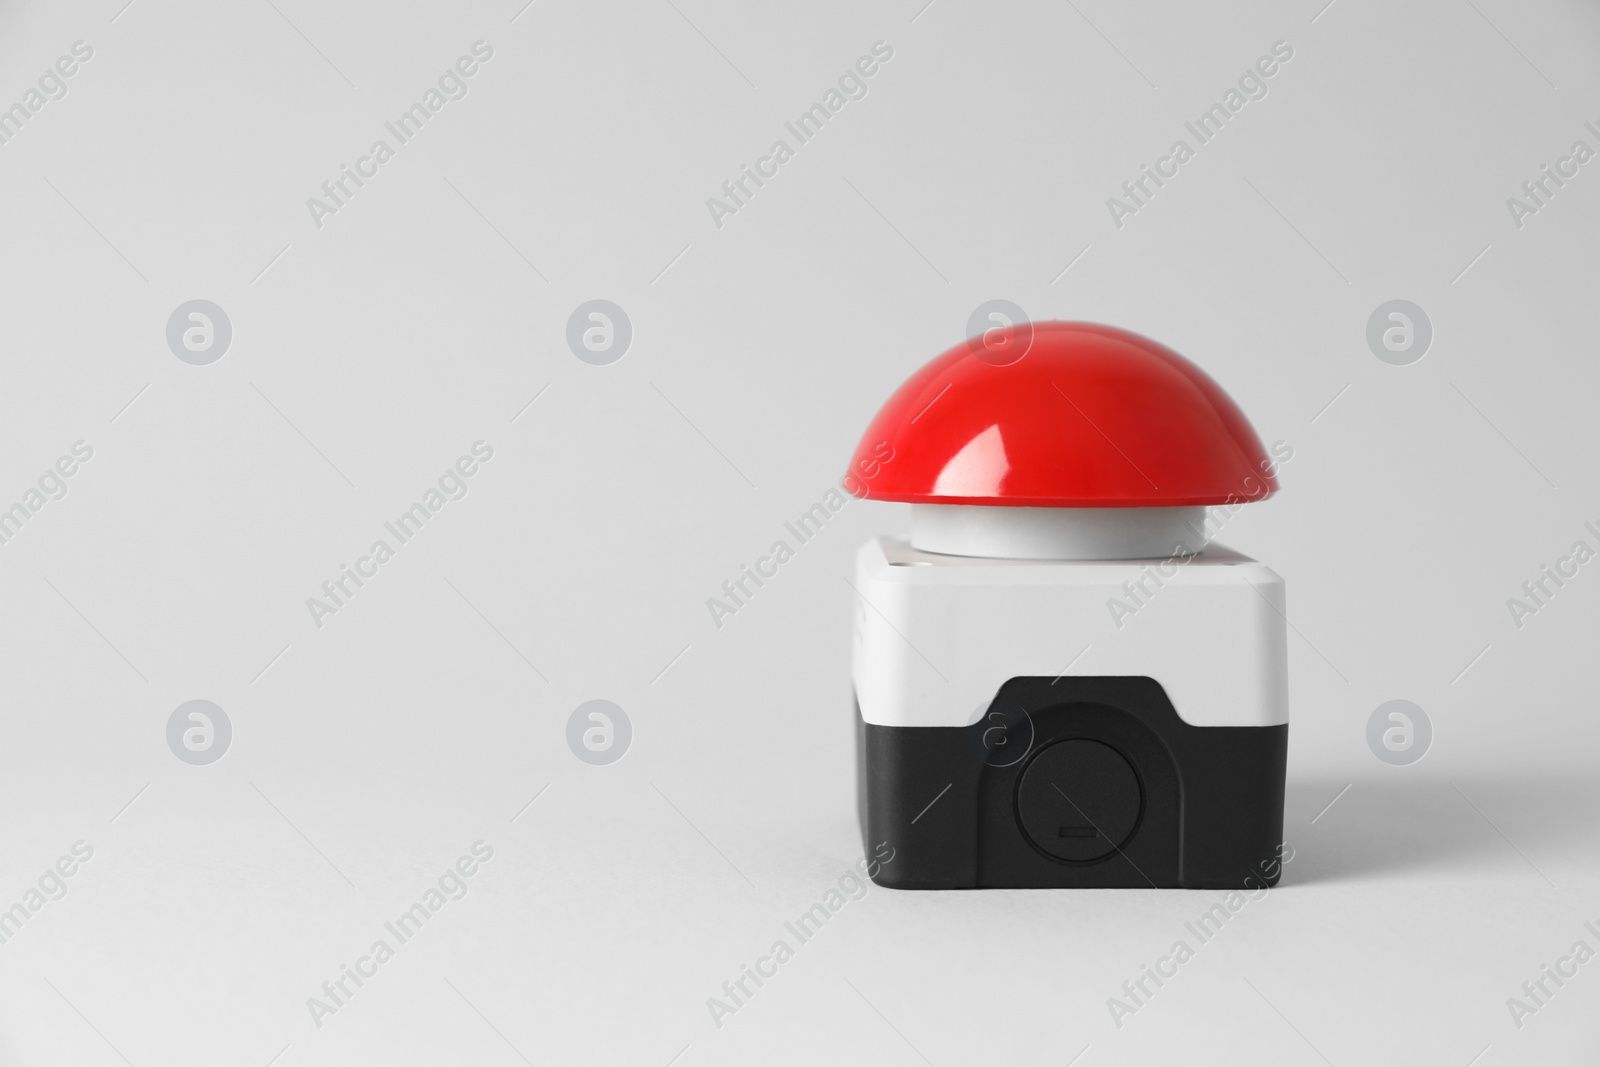 Photo of Red button of nuclear weapon on white background, space for text. War concept